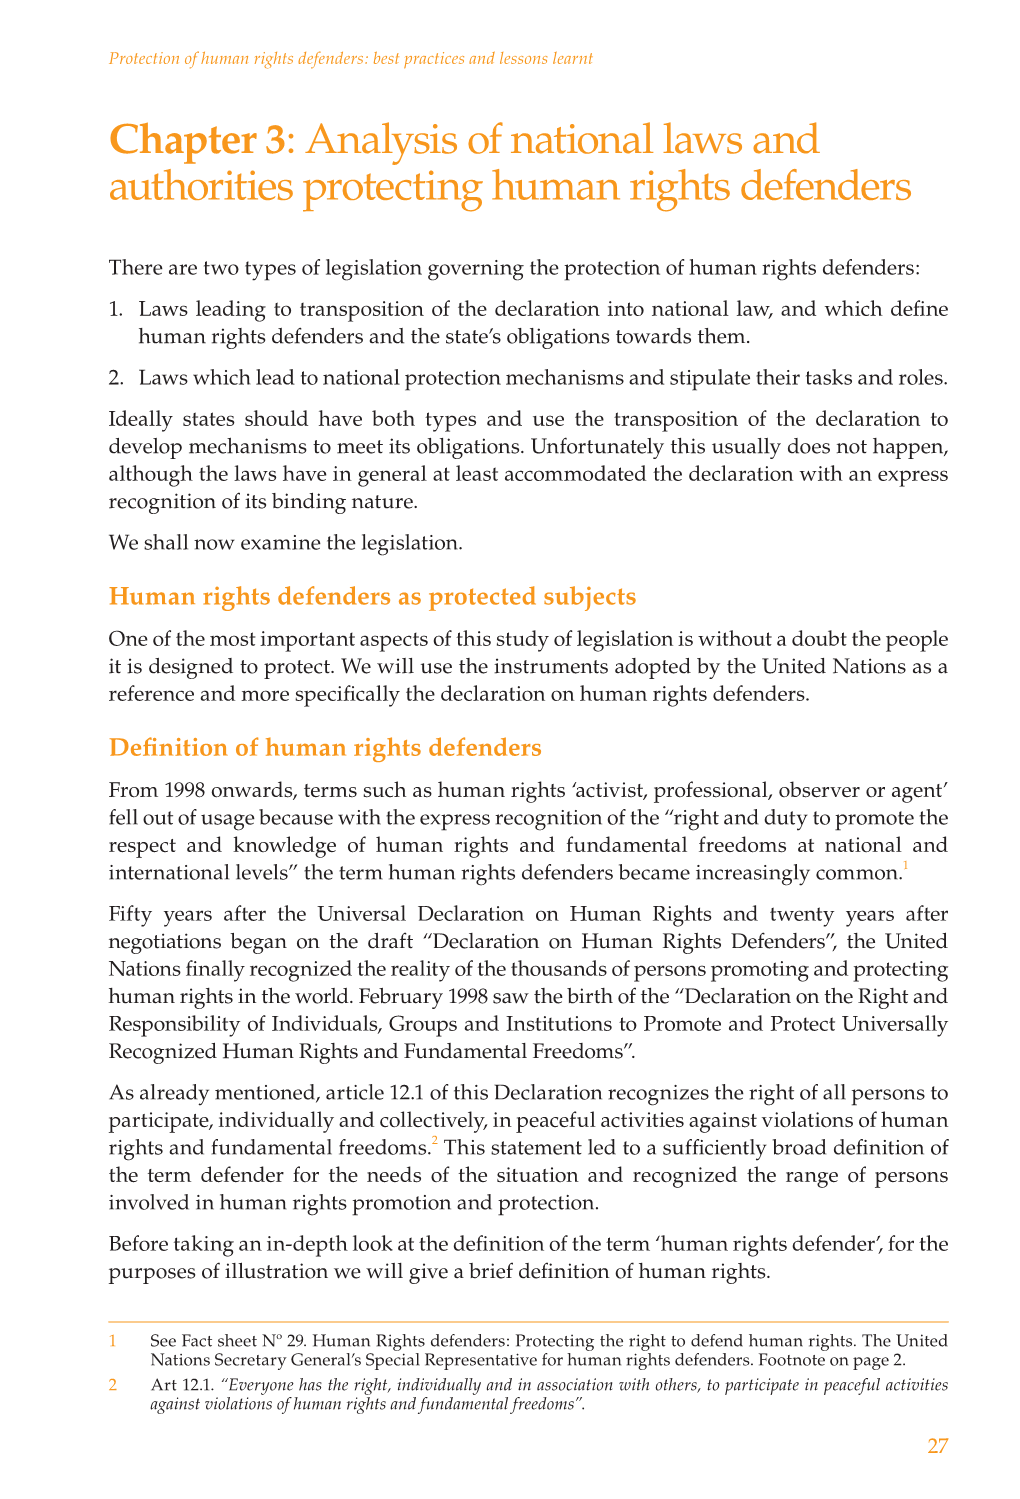 Chapter 3: Analysis of National Laws and Authorities Protecting Human Rights Defenders